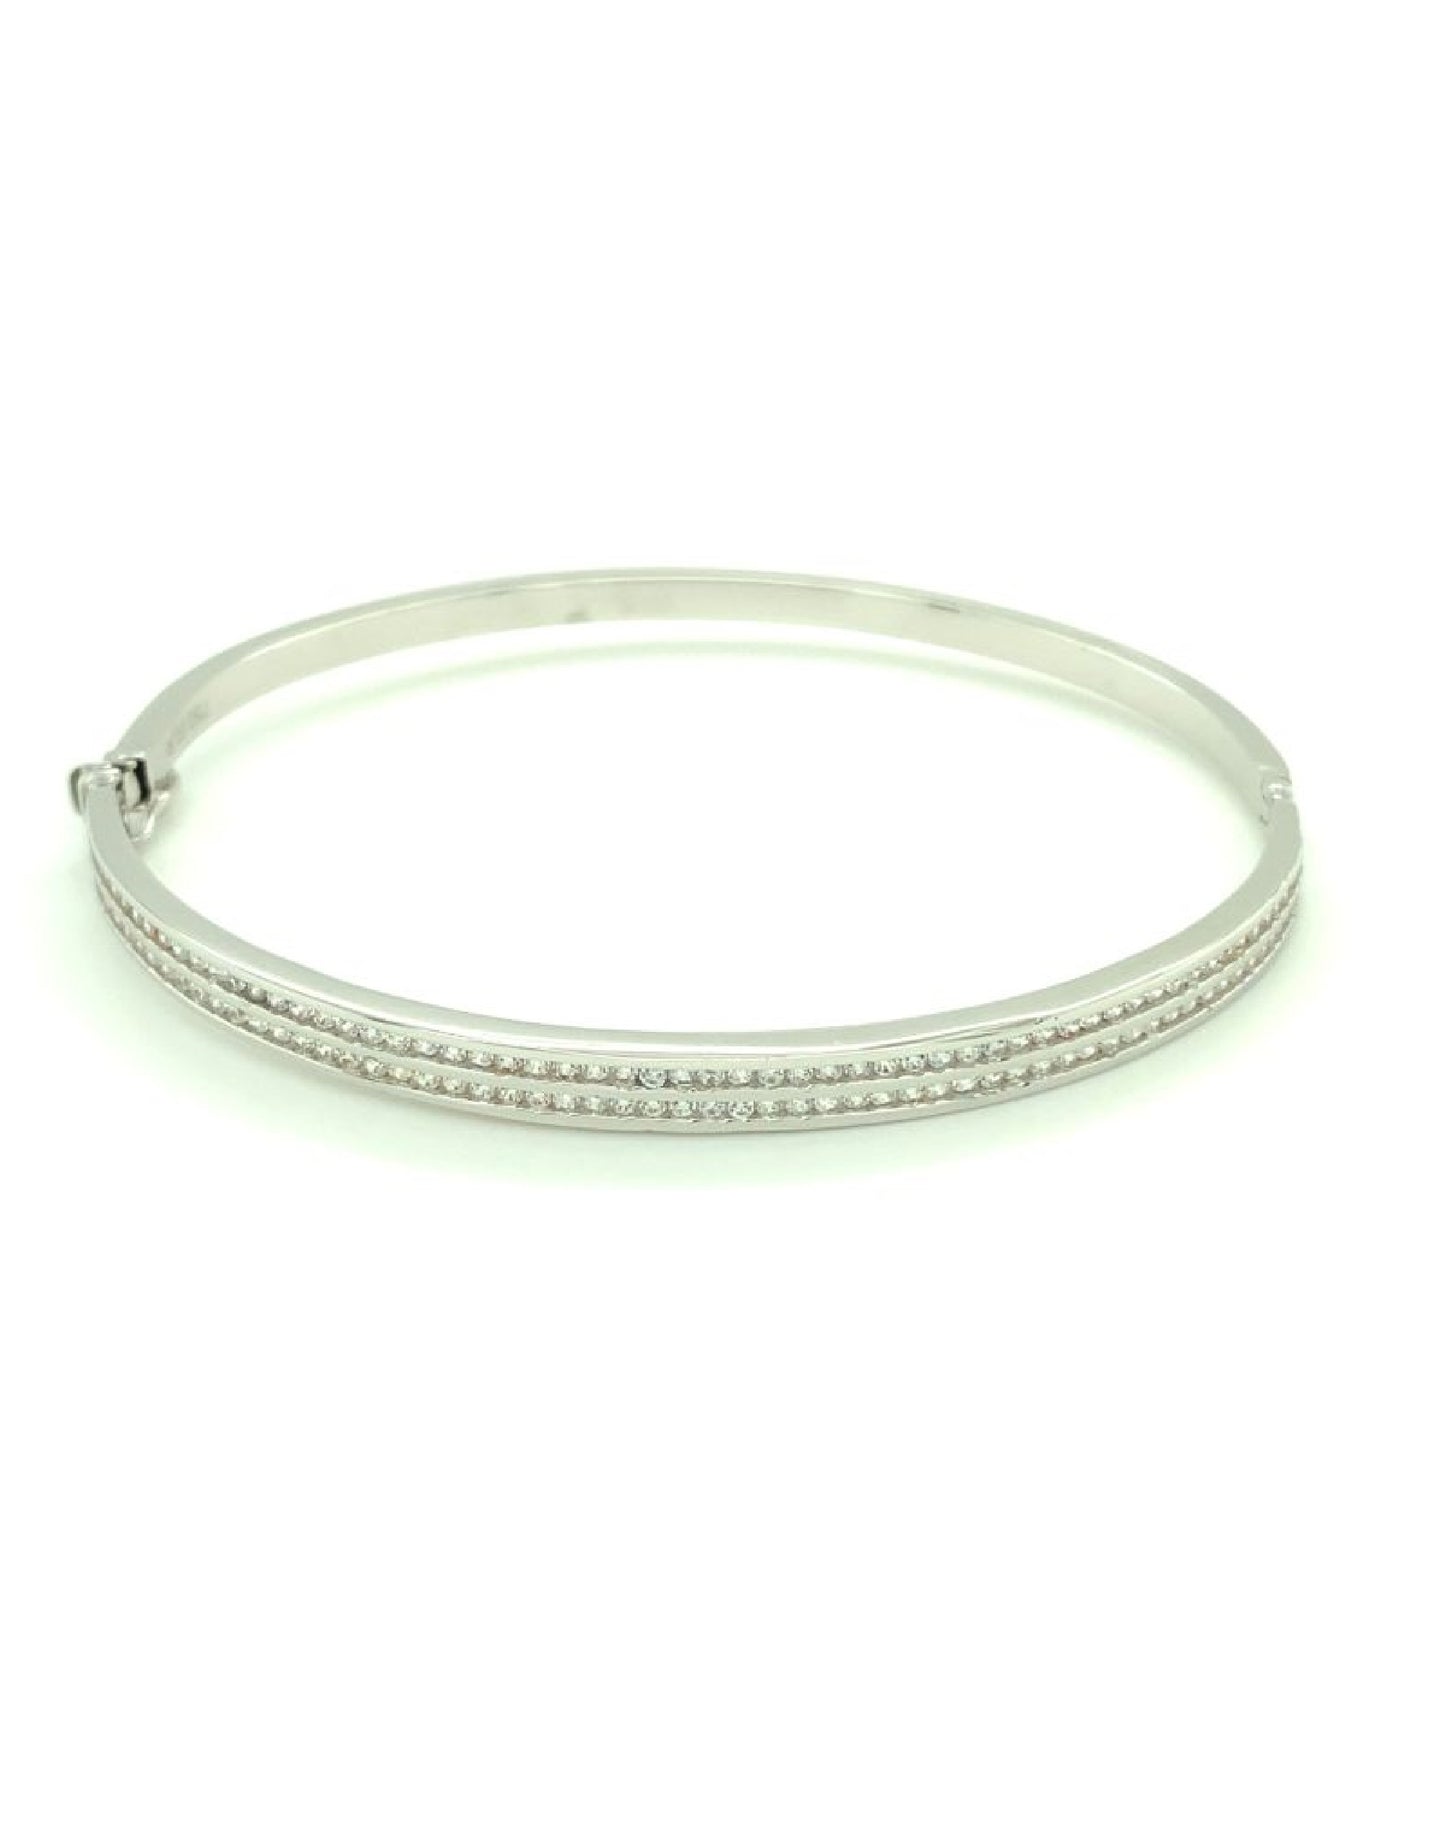 Gold 18 Kt White Gold Bangle With Two Channel Setting Jewelry